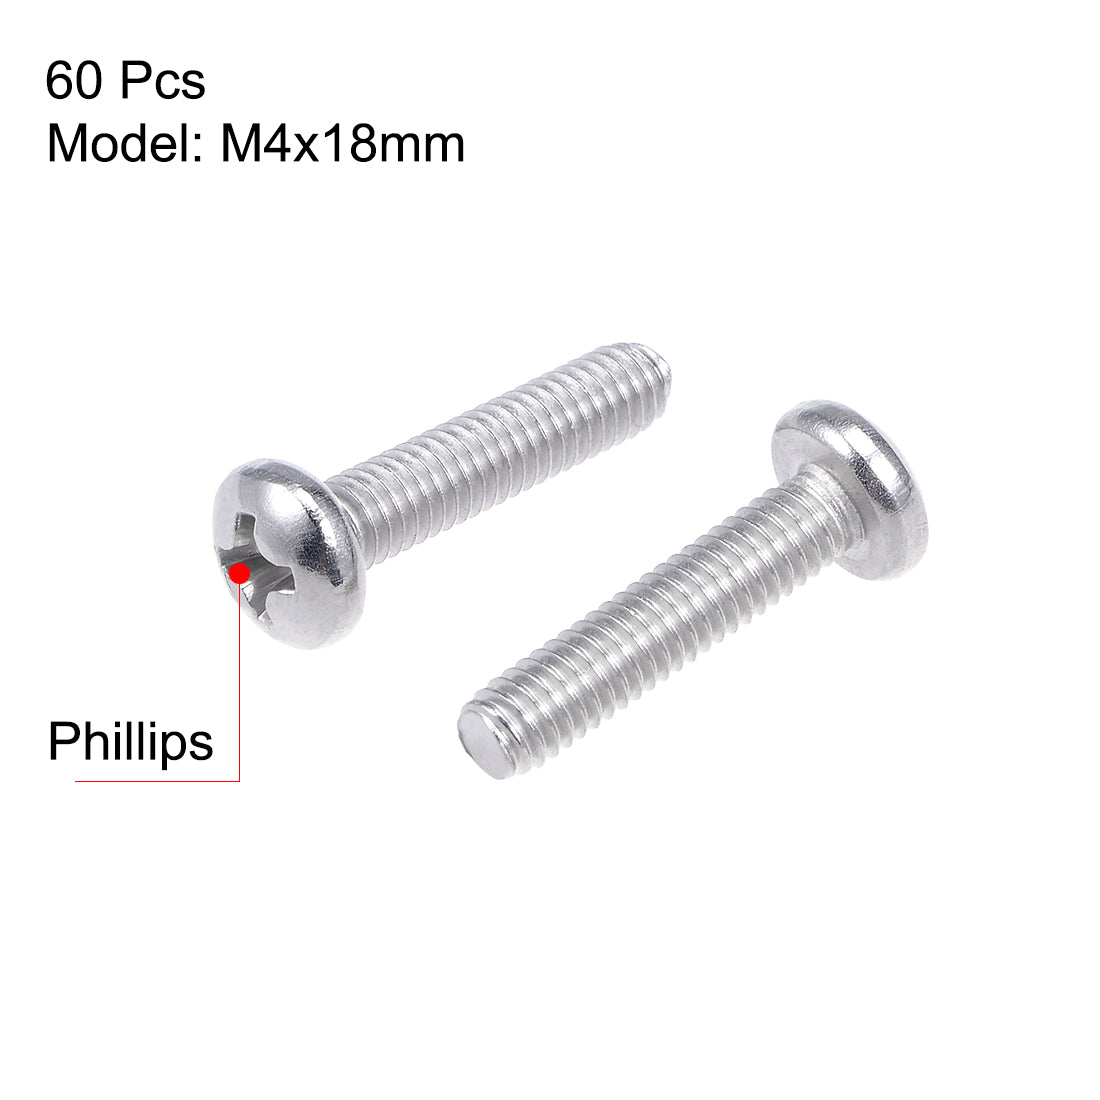 Uxcell Uxcell M3x8mm Machine Screws Pan Phillips Cross Head Screw 304 Stainless Steel Fasteners Bolts 60Pcs